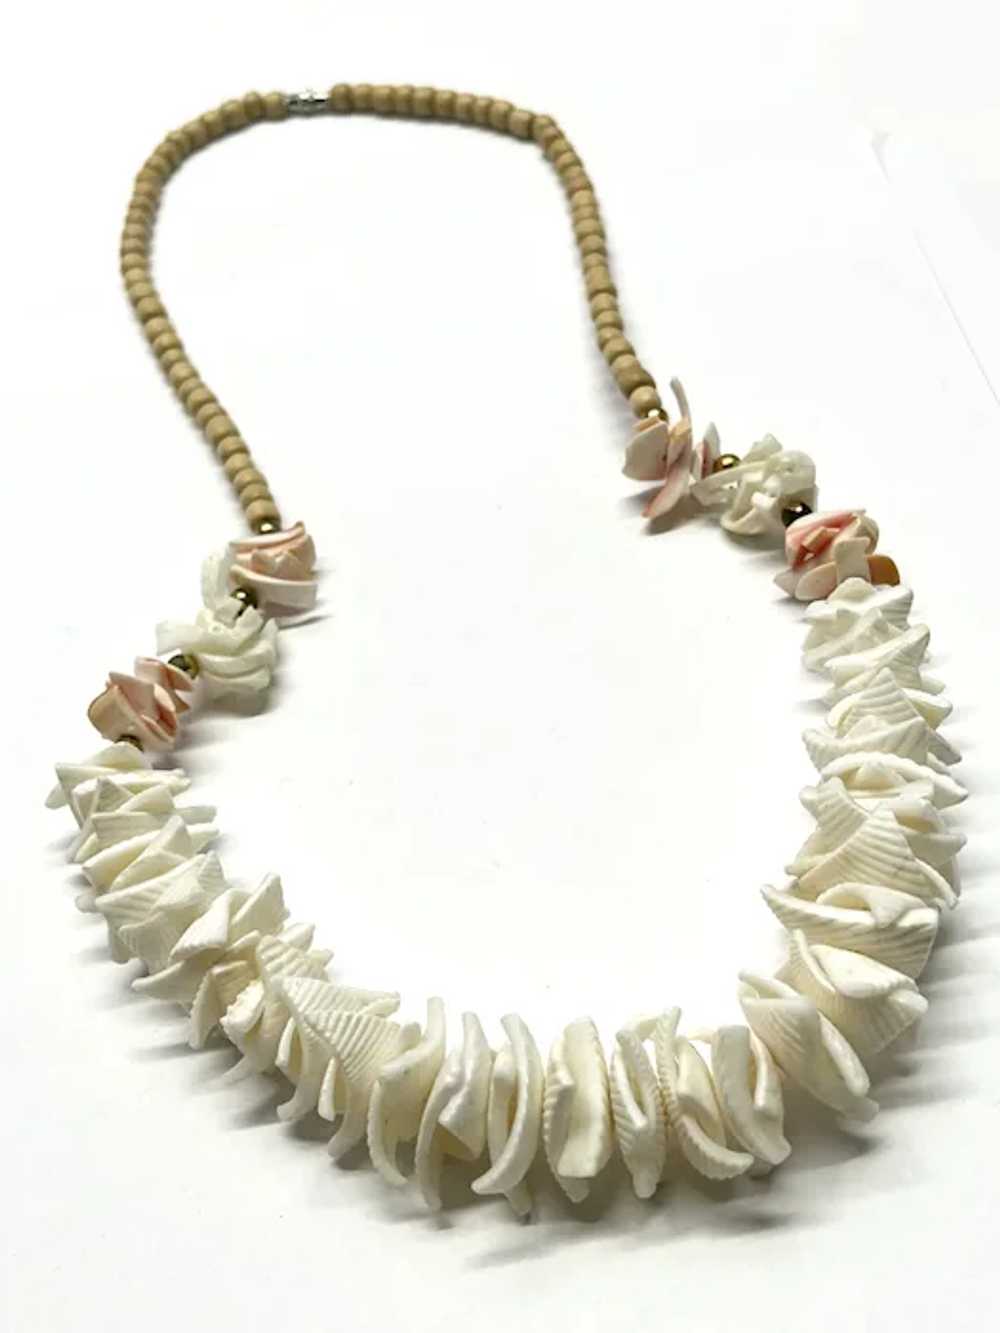 Vintage sea shell beaded necklace - image 3